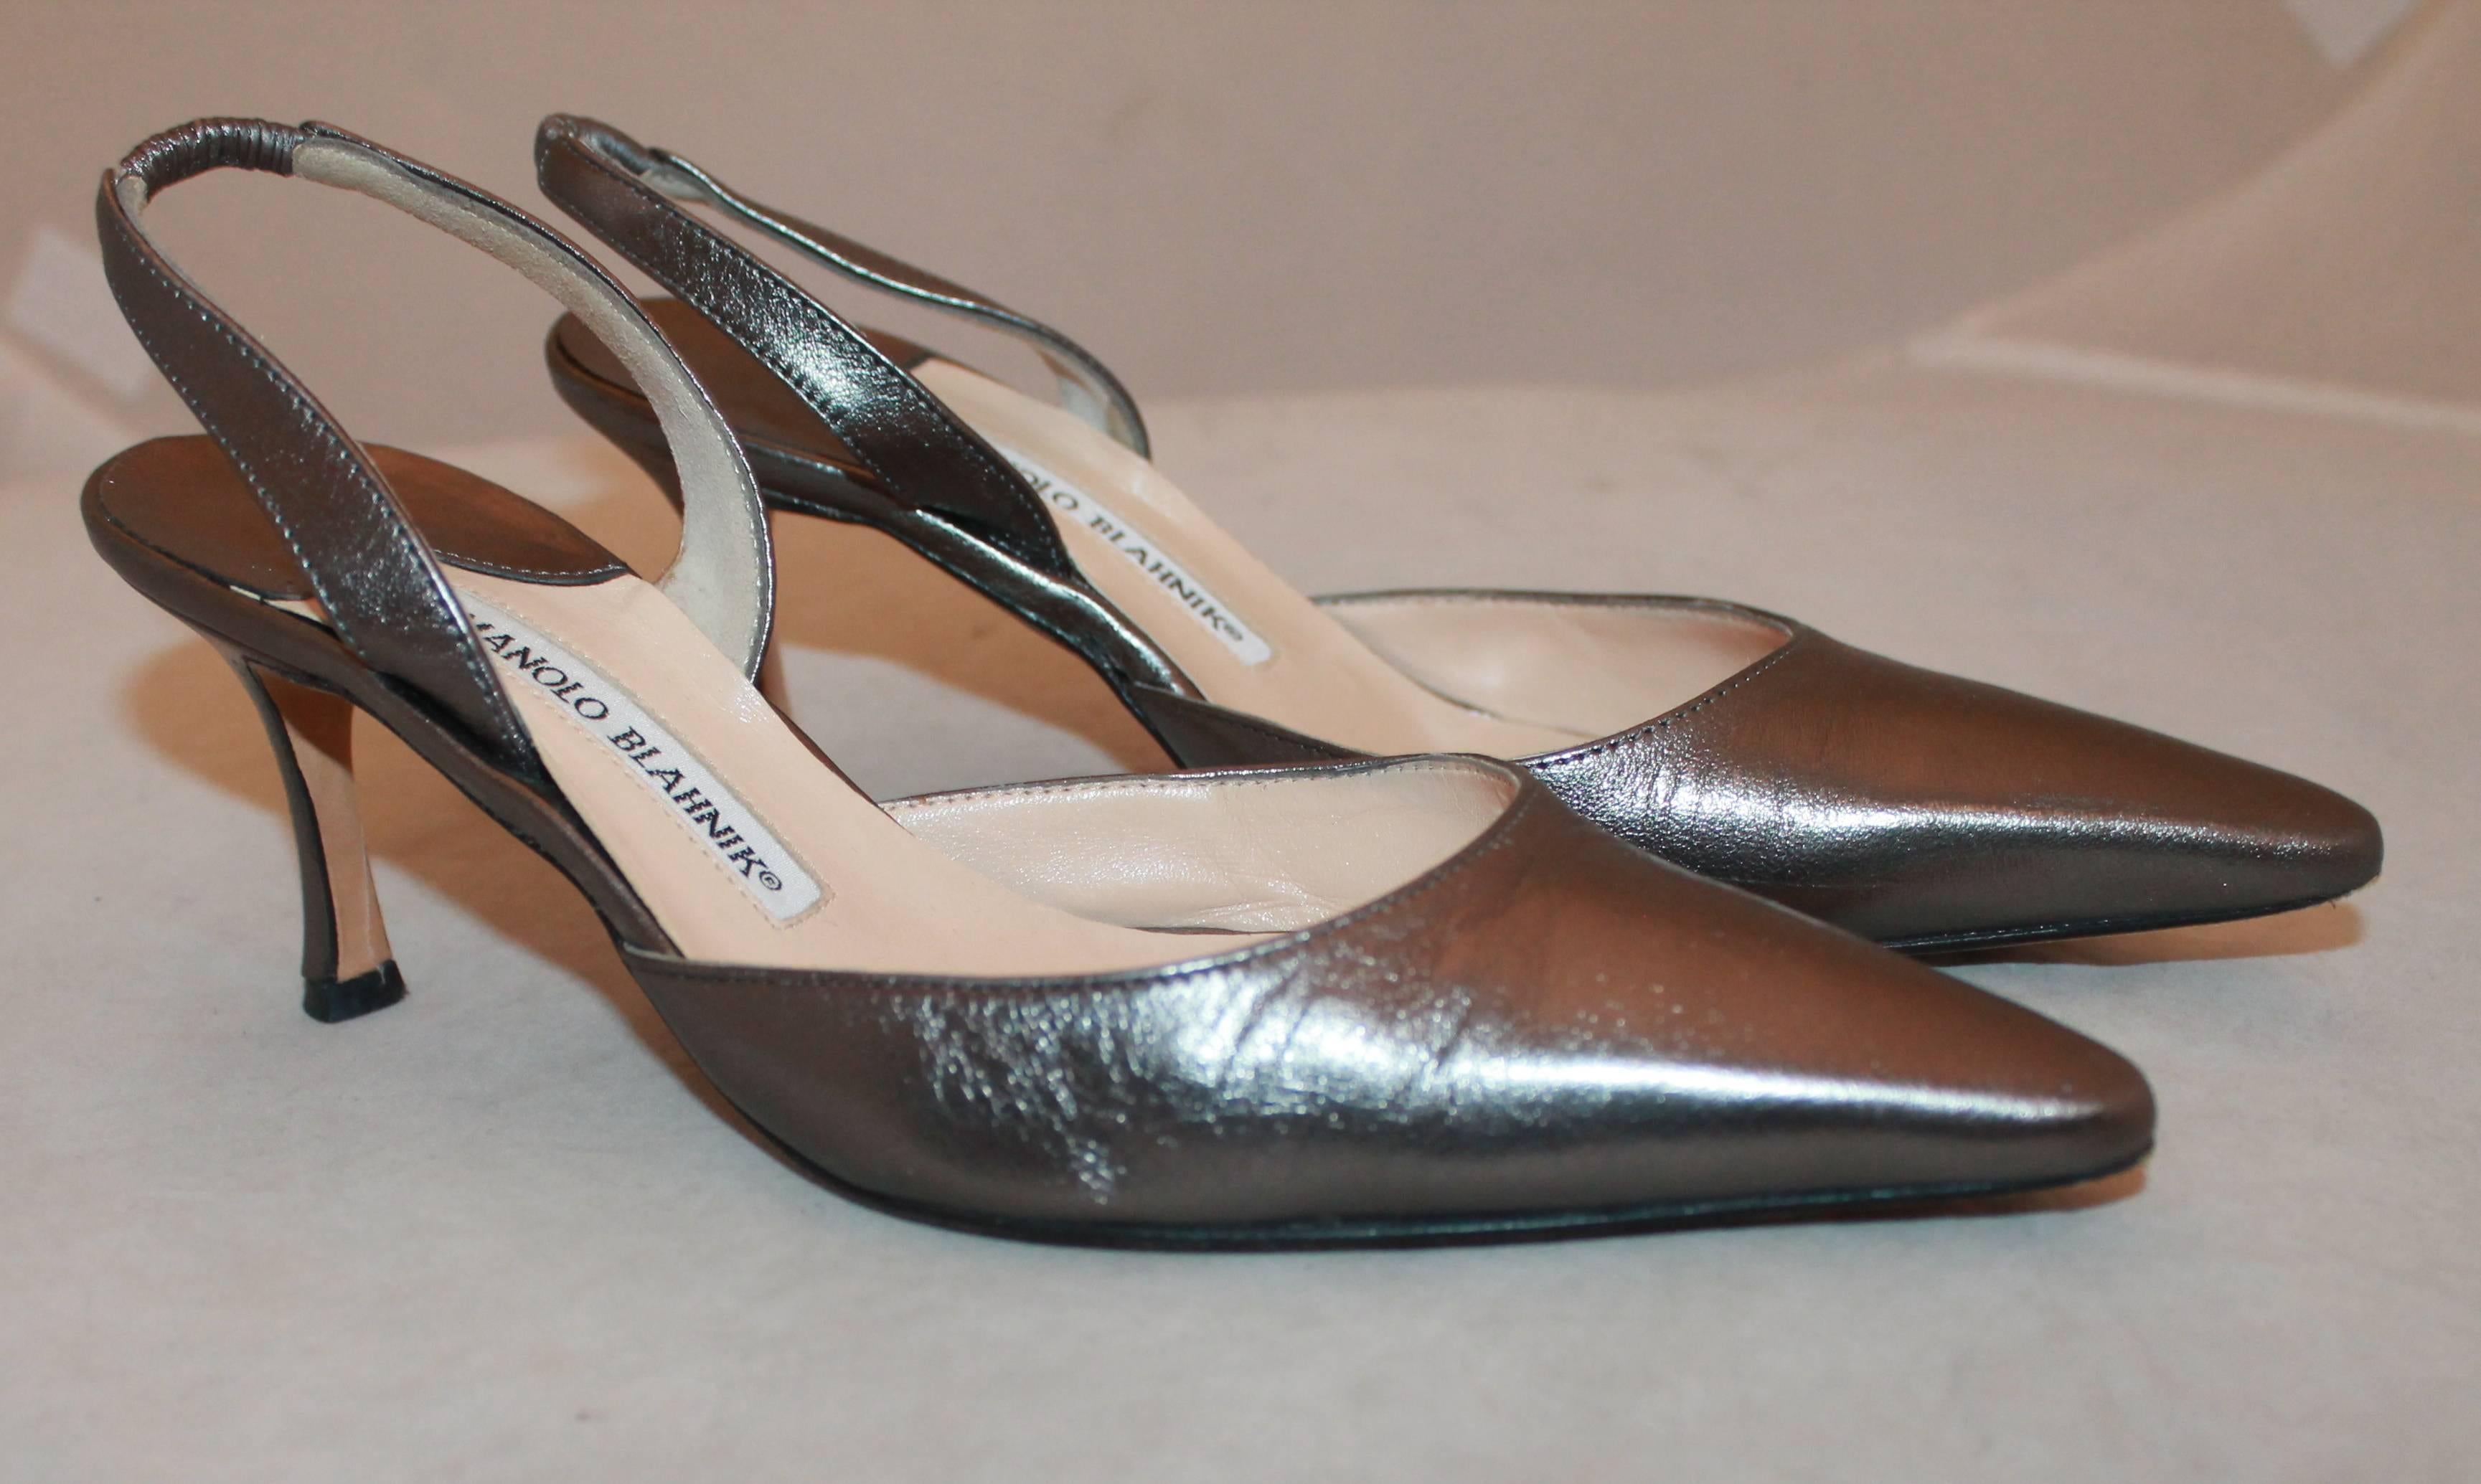 Manolo Blahnik Caroline Gunmetal Heels - 35.5.  These lovely shoes are in very good condition with only some wear consistent with their age.  They feature an edgy gunmetal look, with a classy pointed toe, a slingback strap, and a shorter